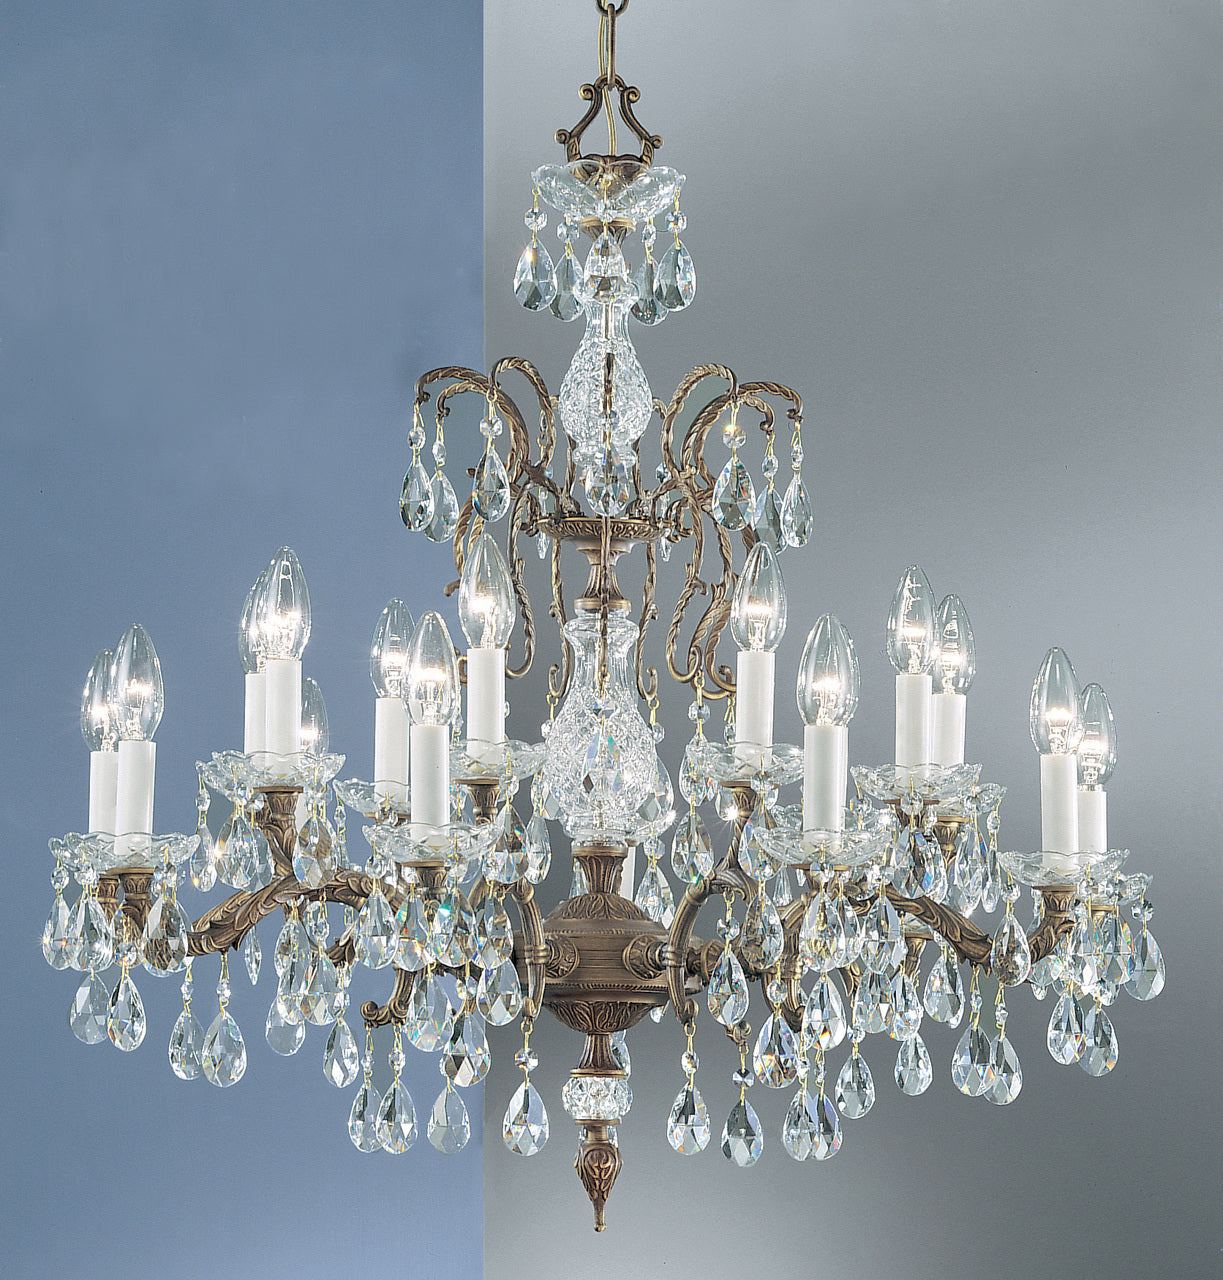 Classic Lighting 5538 OWB SGT Madrid Crystal/Cast Brass Chandelier in Olde World Bronze (Imported from Spain)